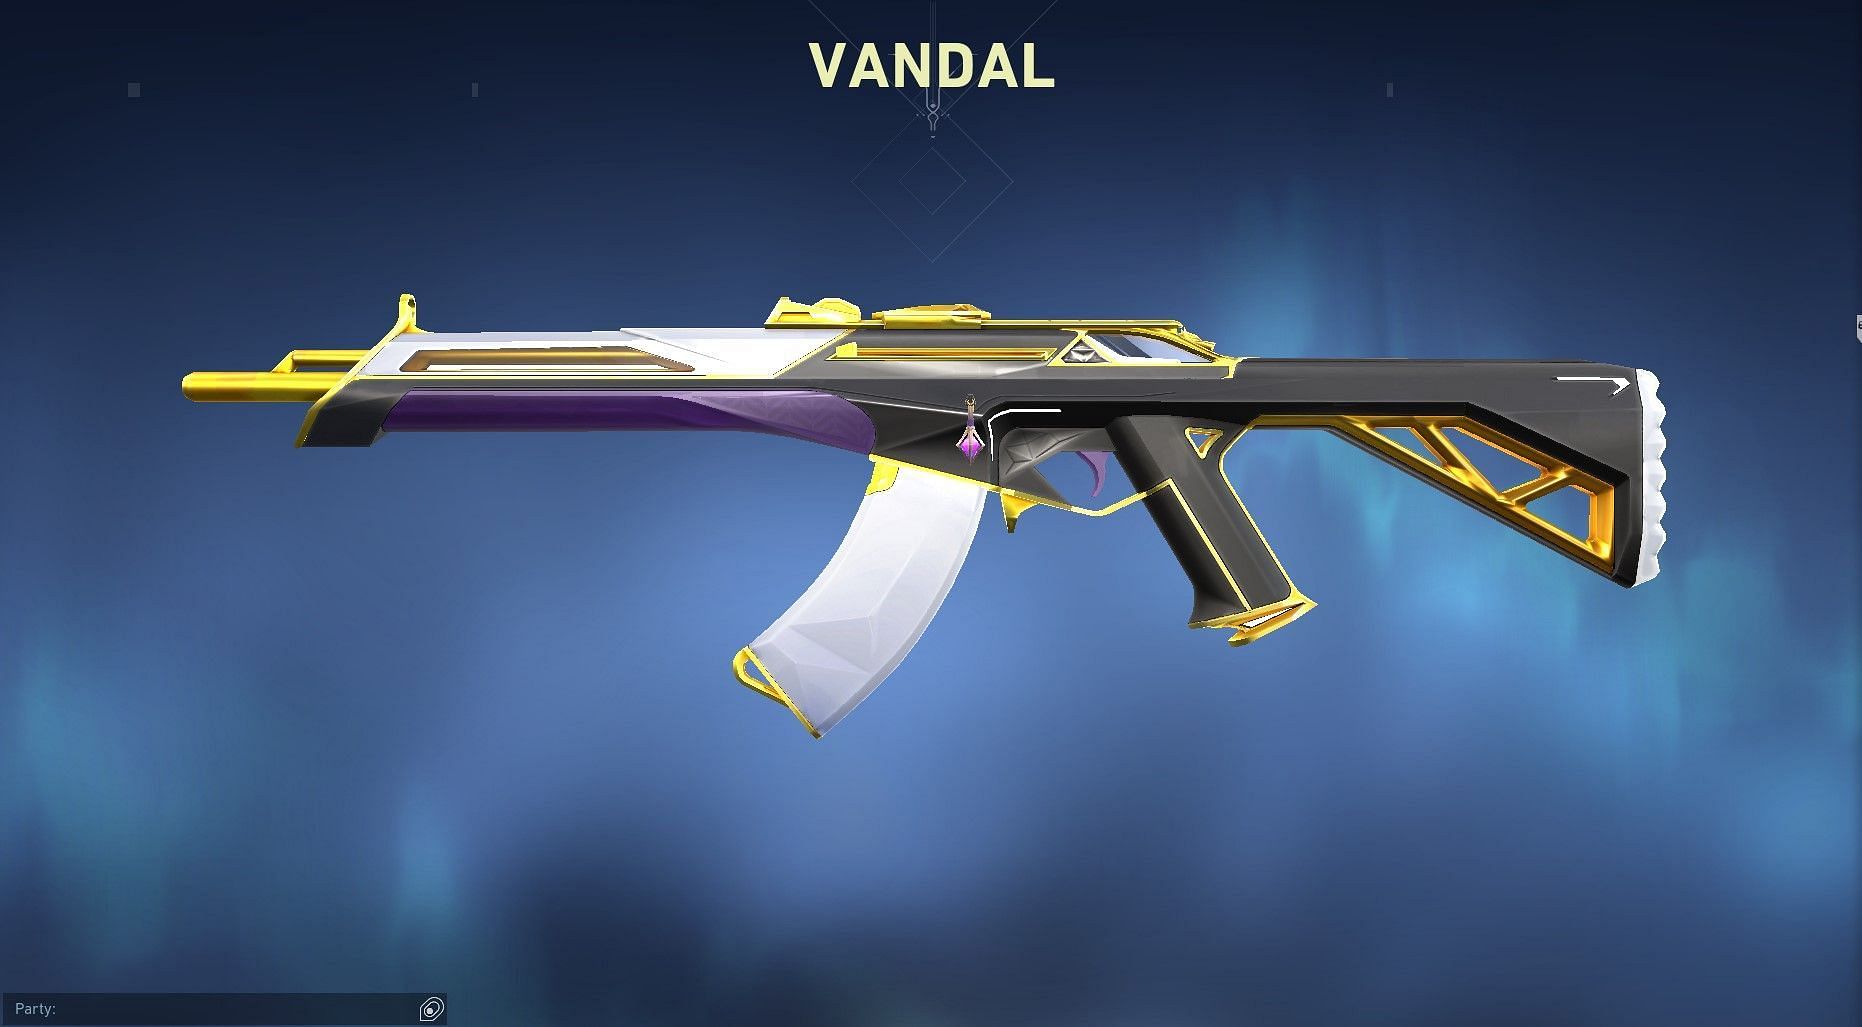 Prime Vandal can be bought for 1775 VP (Image via Valorant)